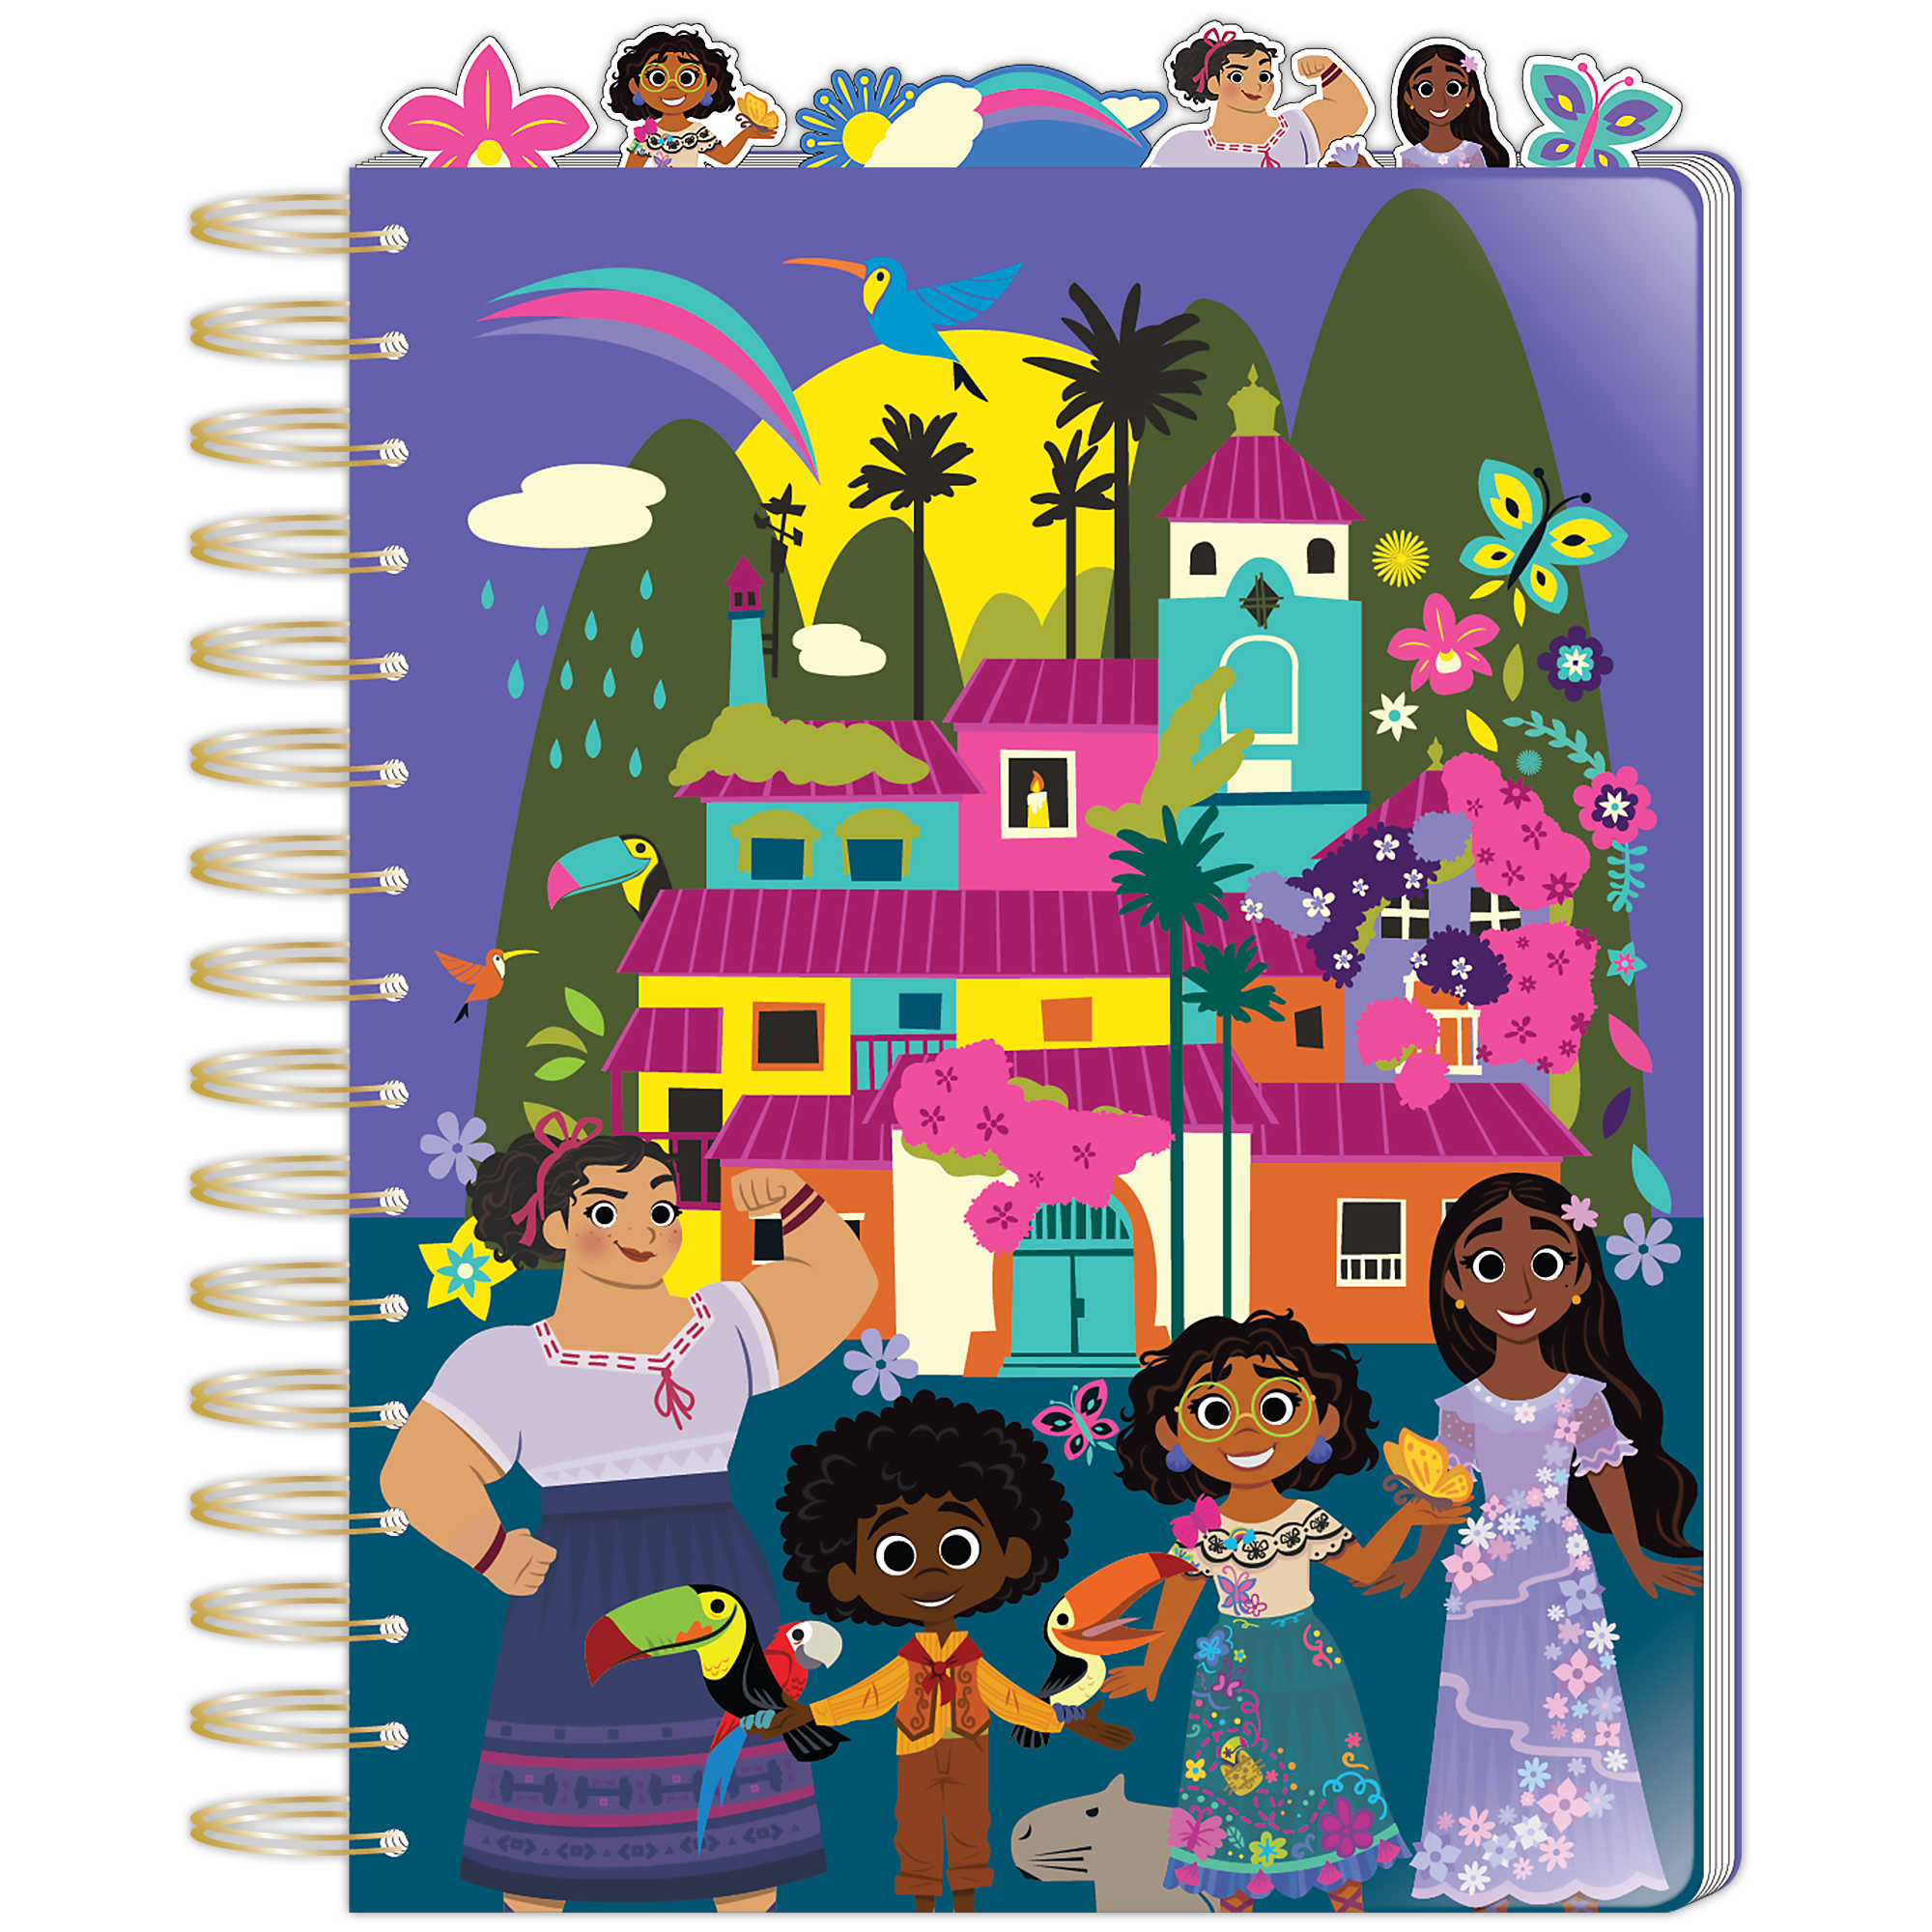 Disney Encanto Tab Journal, Metal Spiral Bound, 144 Lined Sheets, 8.375-inches by 6.5-inches - image 1 of 9